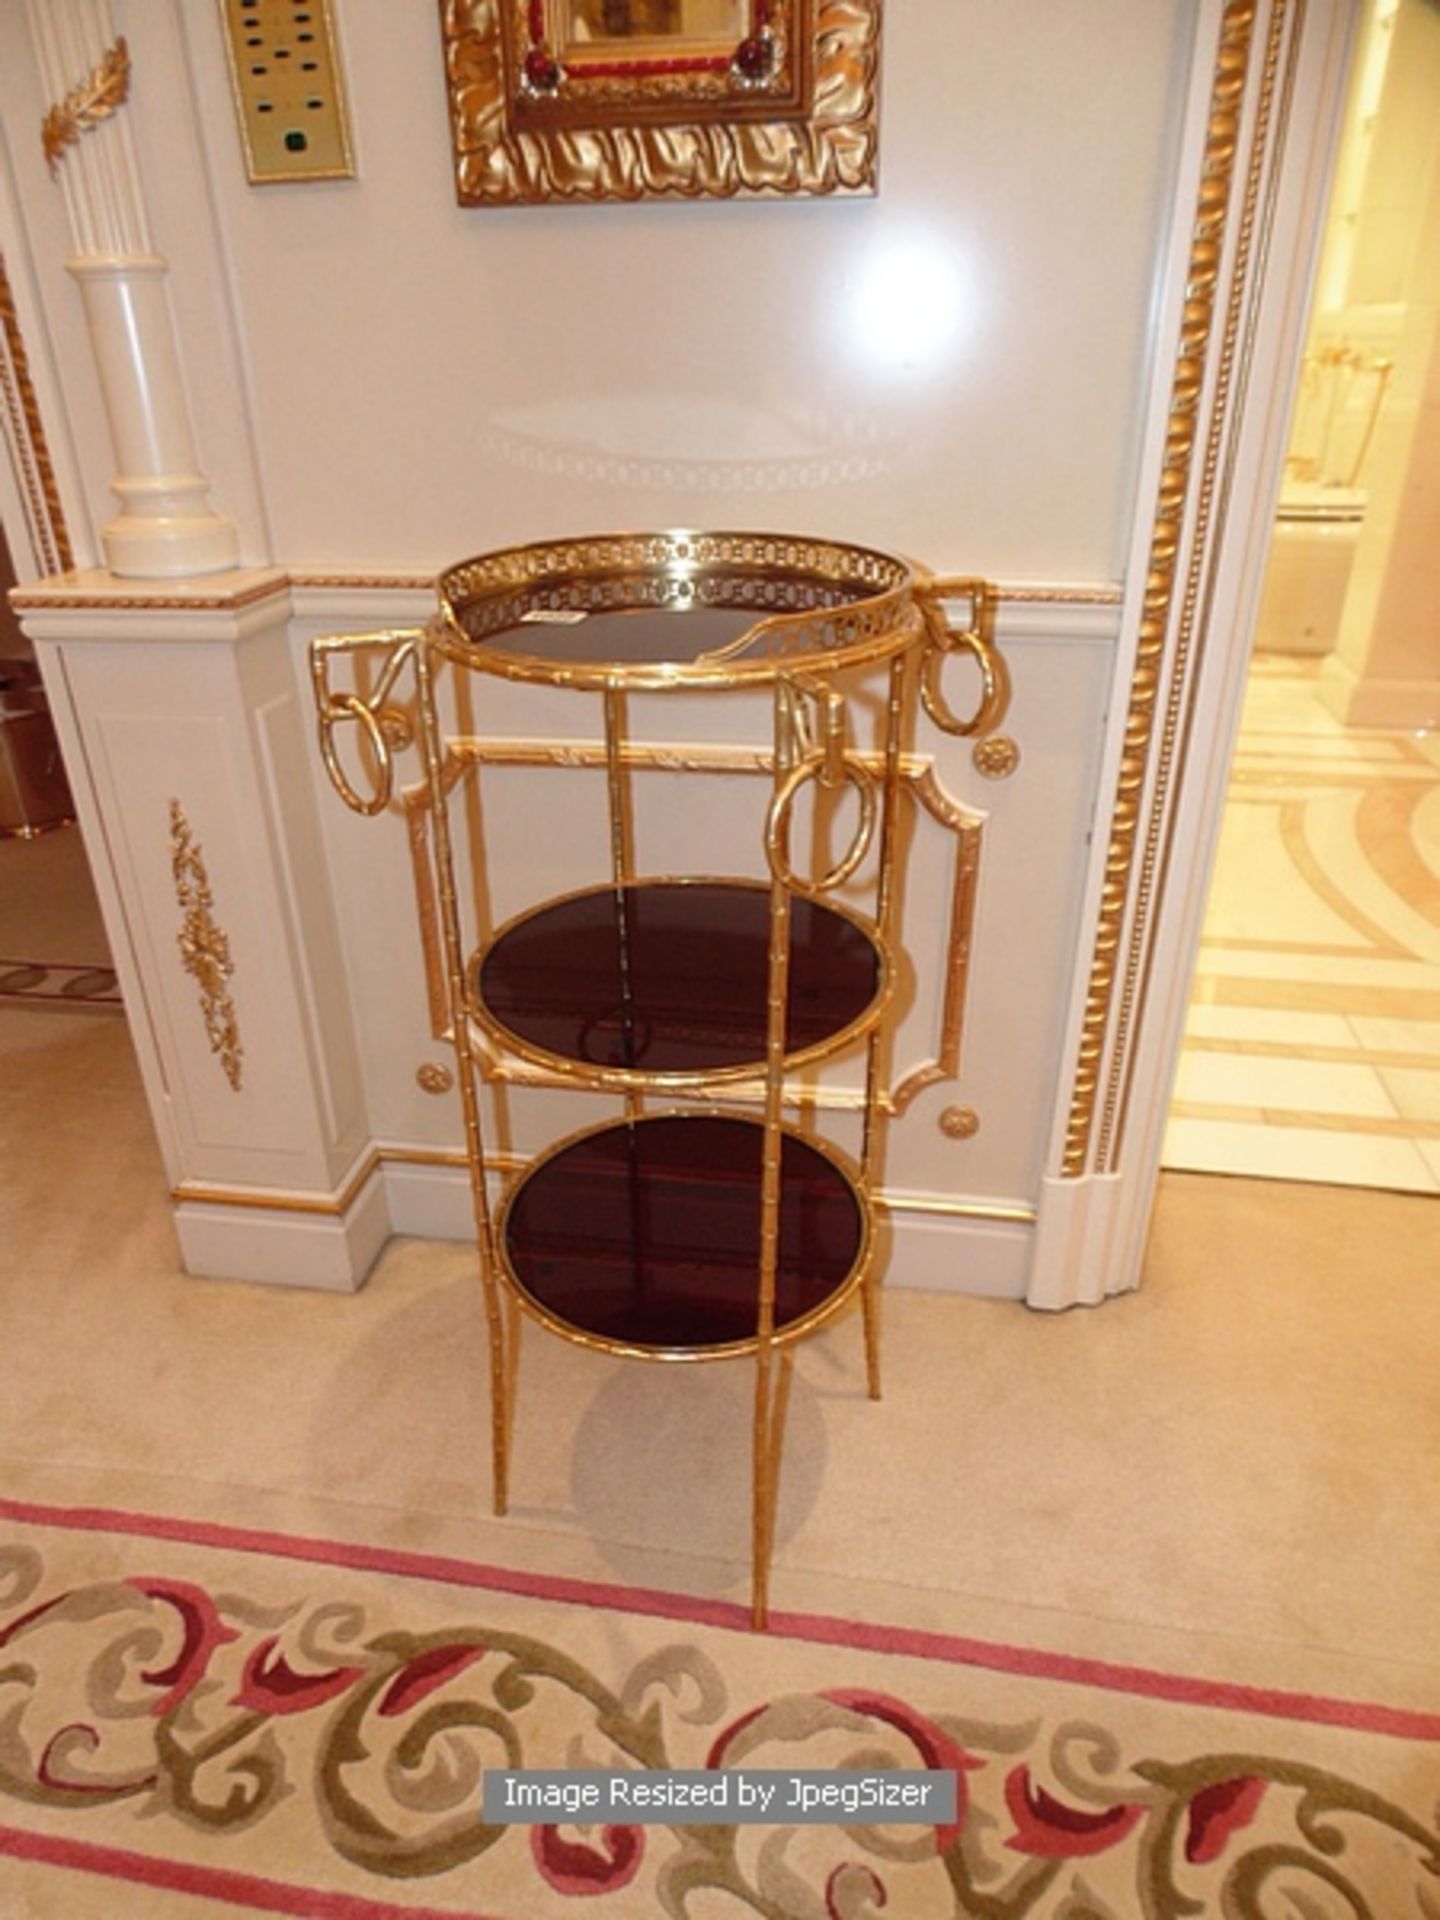 Directoire Period reproduction three tier gilded bronze gueridon with 24ct. gold finish each tier